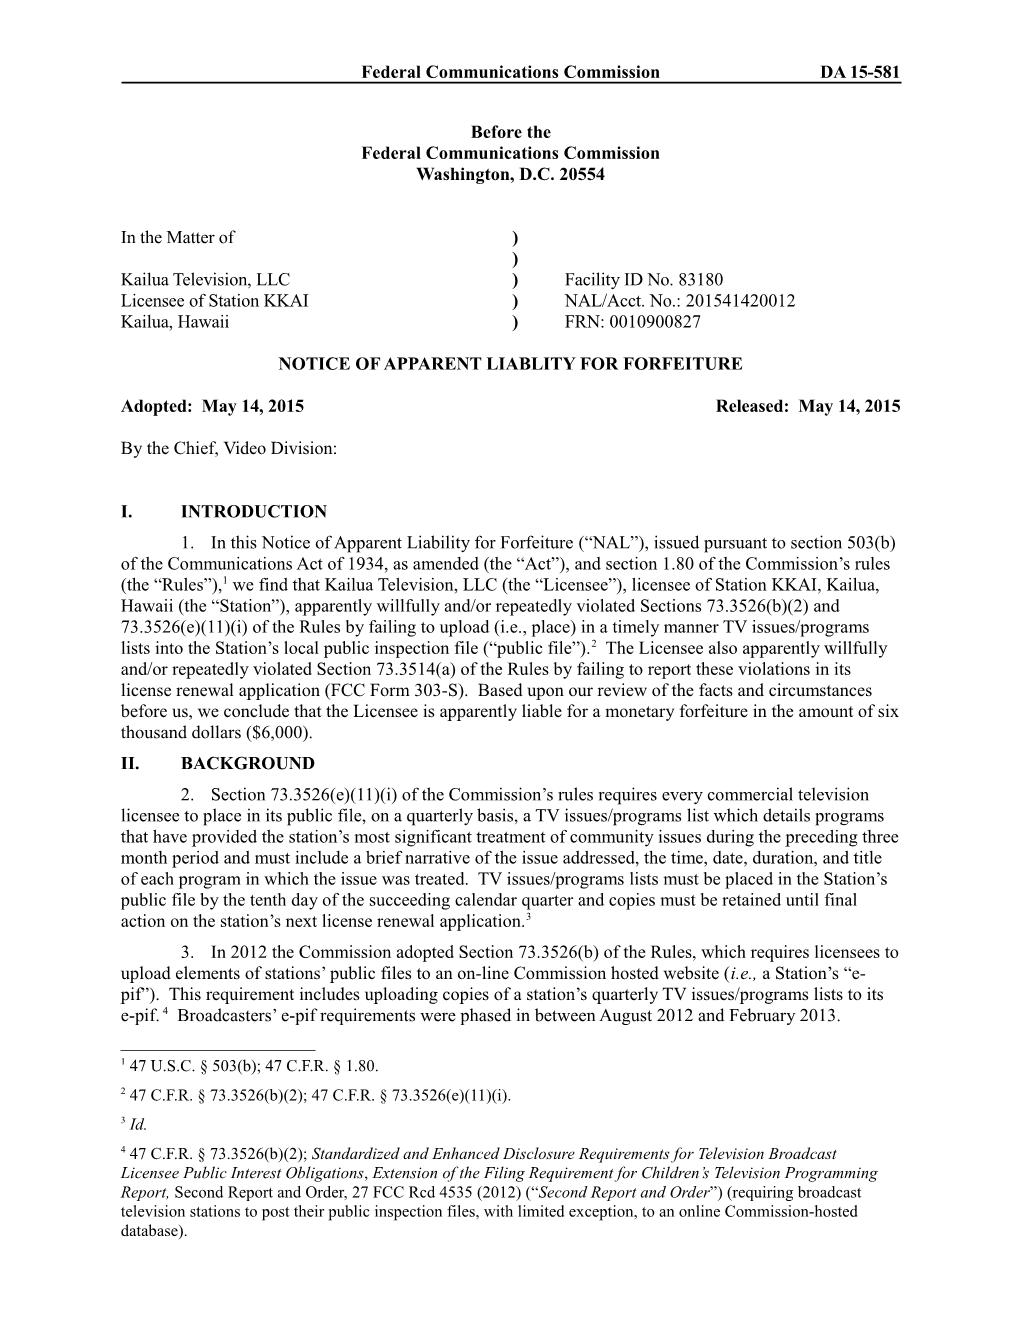 Notice of Apparent Liablity for Forfeiture